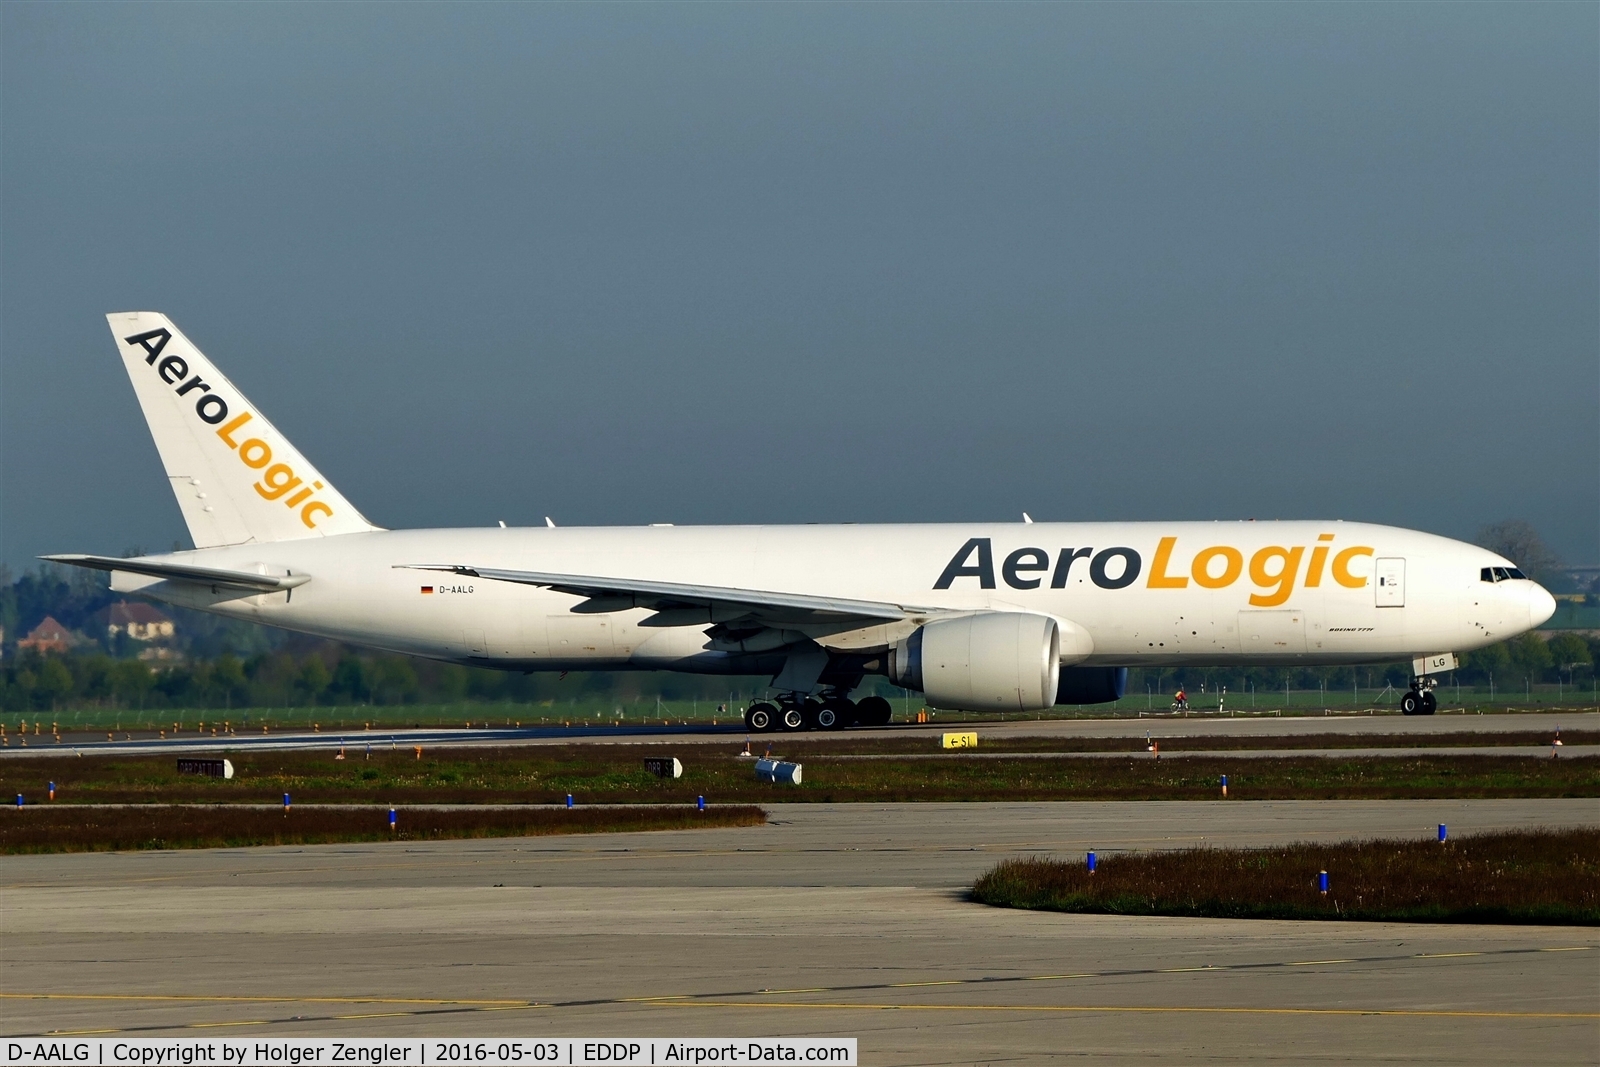 D-AALG, 2010 Boeing 777-FZN C/N 36199, AeroLogic´s Golf is waiting at holding point 08L.......